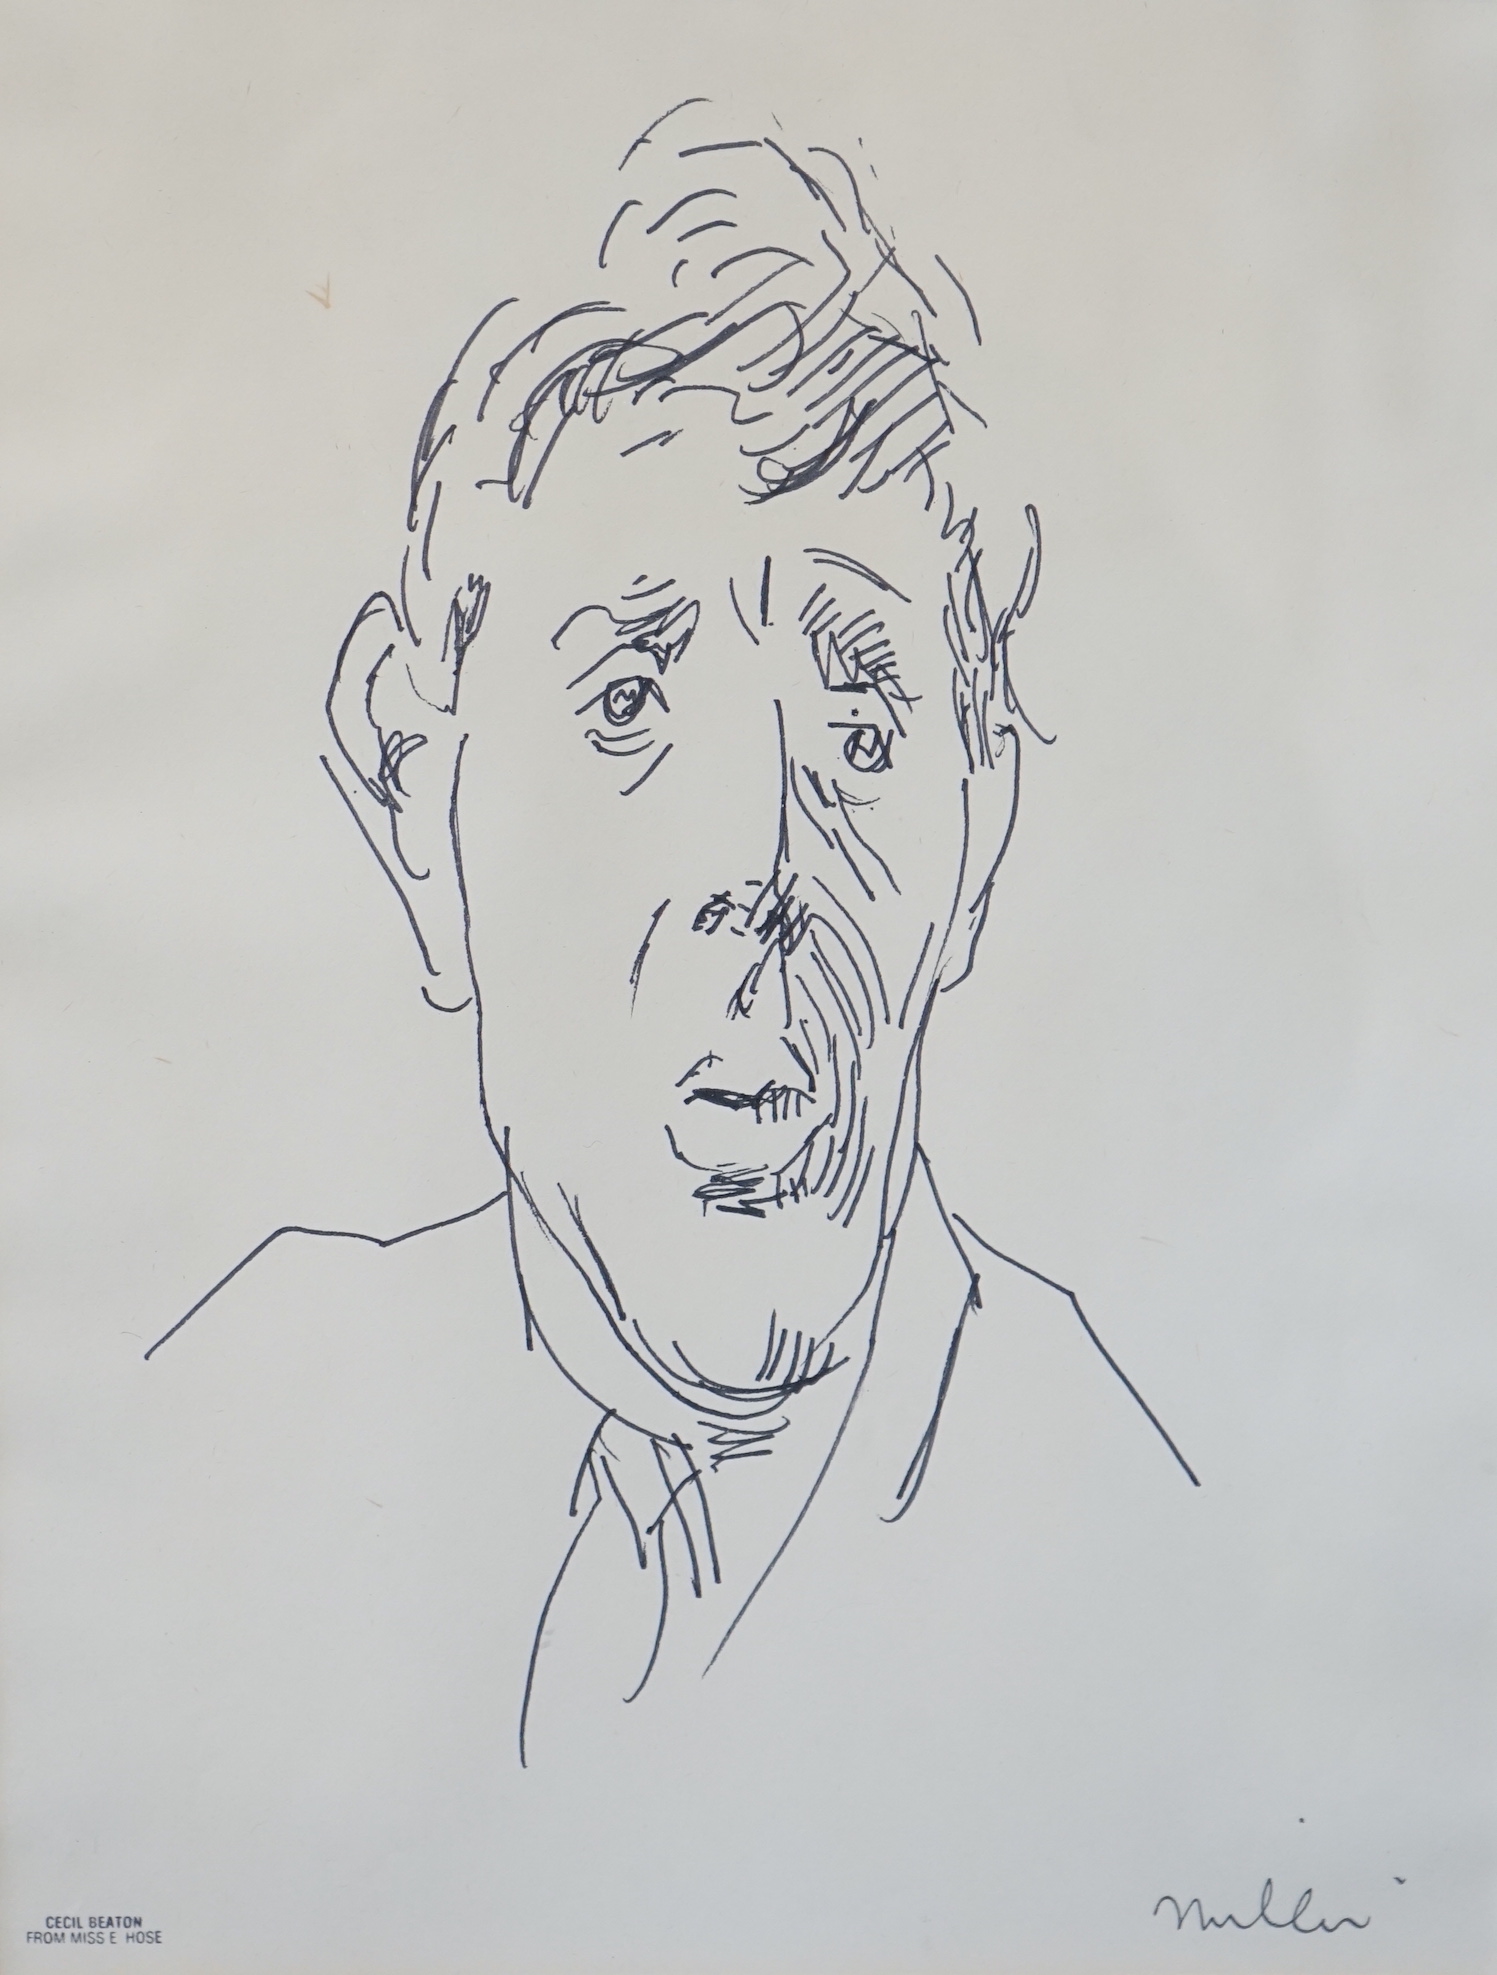 Cecil Beaton (1904-1980), ink sketch, Portrait of Jonathan Miller, inscribed 'Cecil Beaton from Miss E Hose' stamp, 30 x 23cm